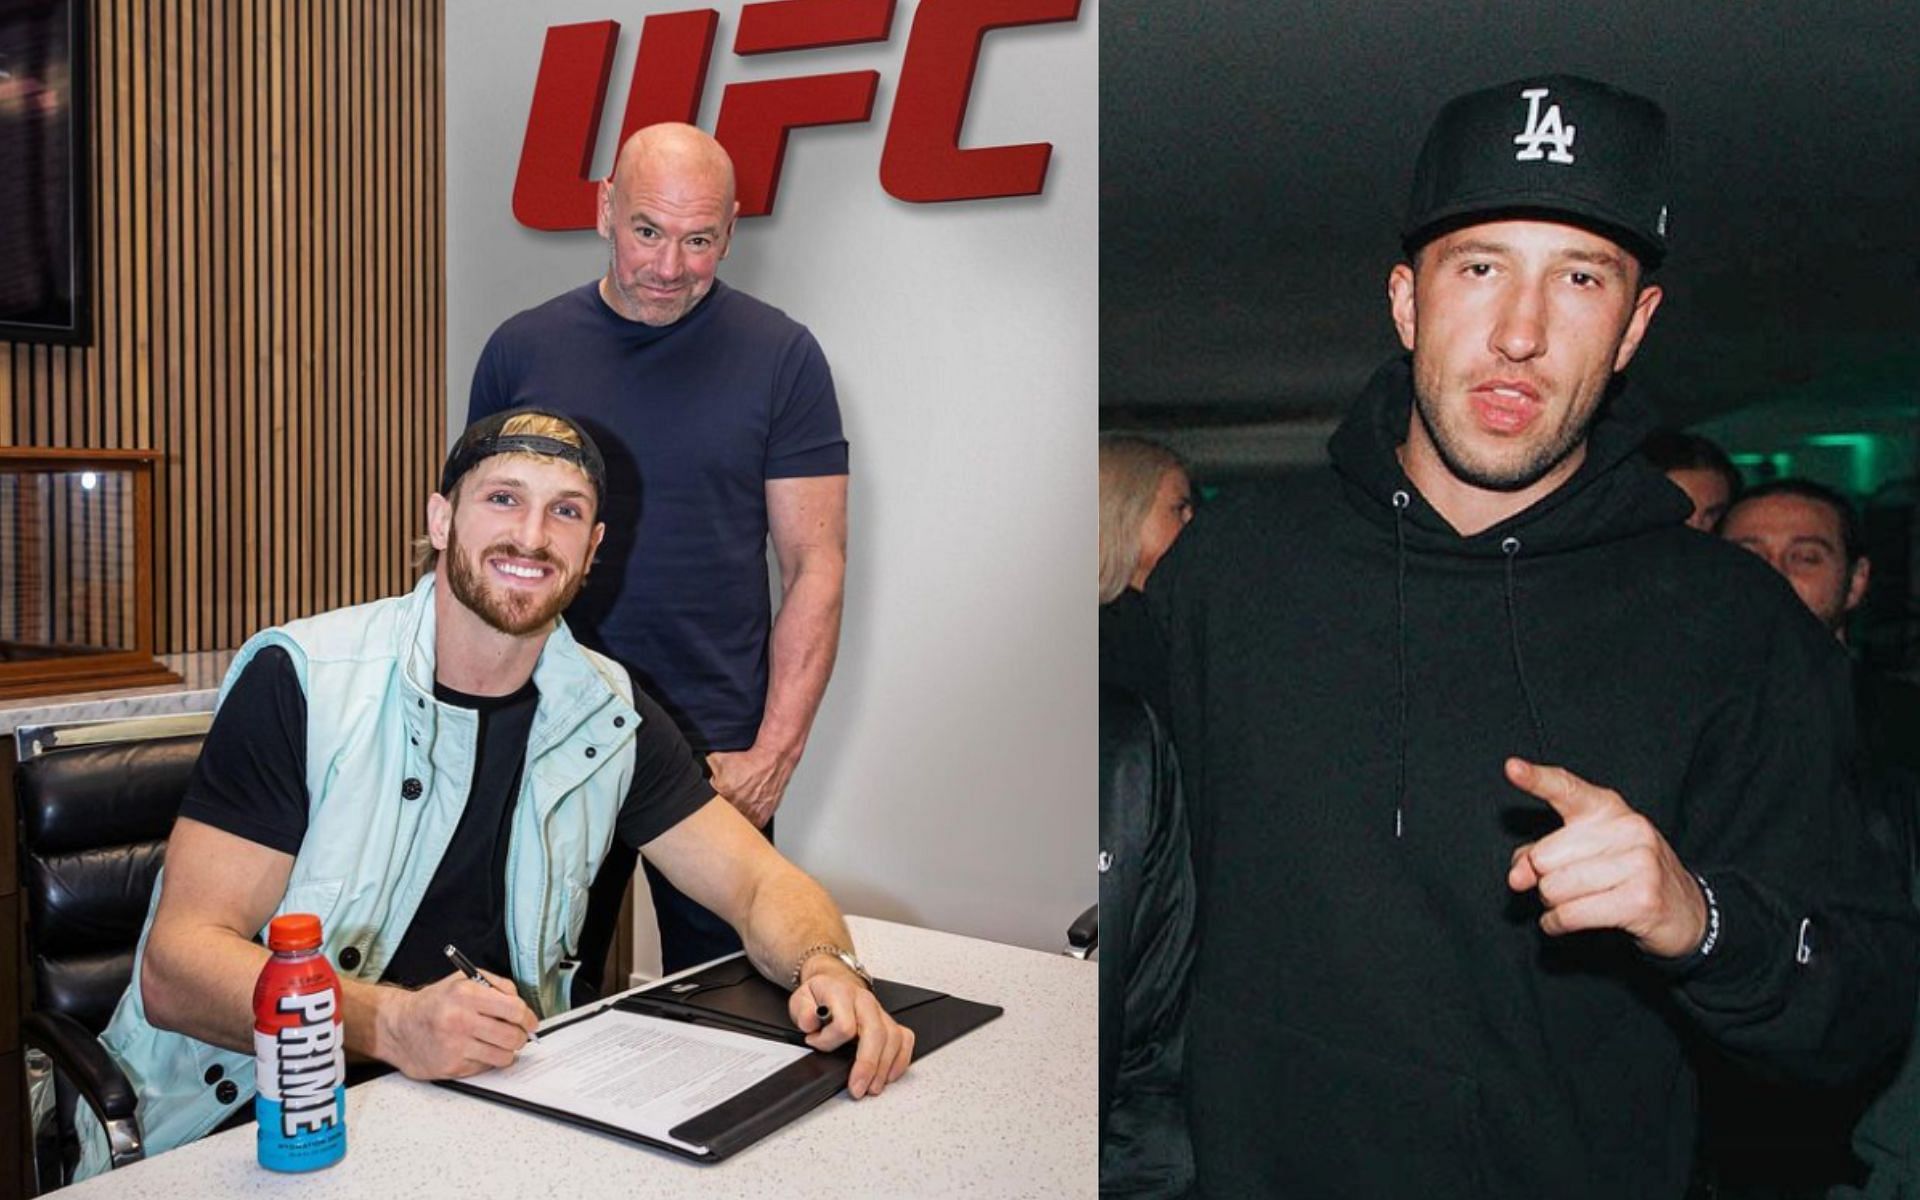 Logan Paul and Dana White (left) and Mike Majlak (right) [Images Courtesy: @danawhite and @heybigmike on Instagram]